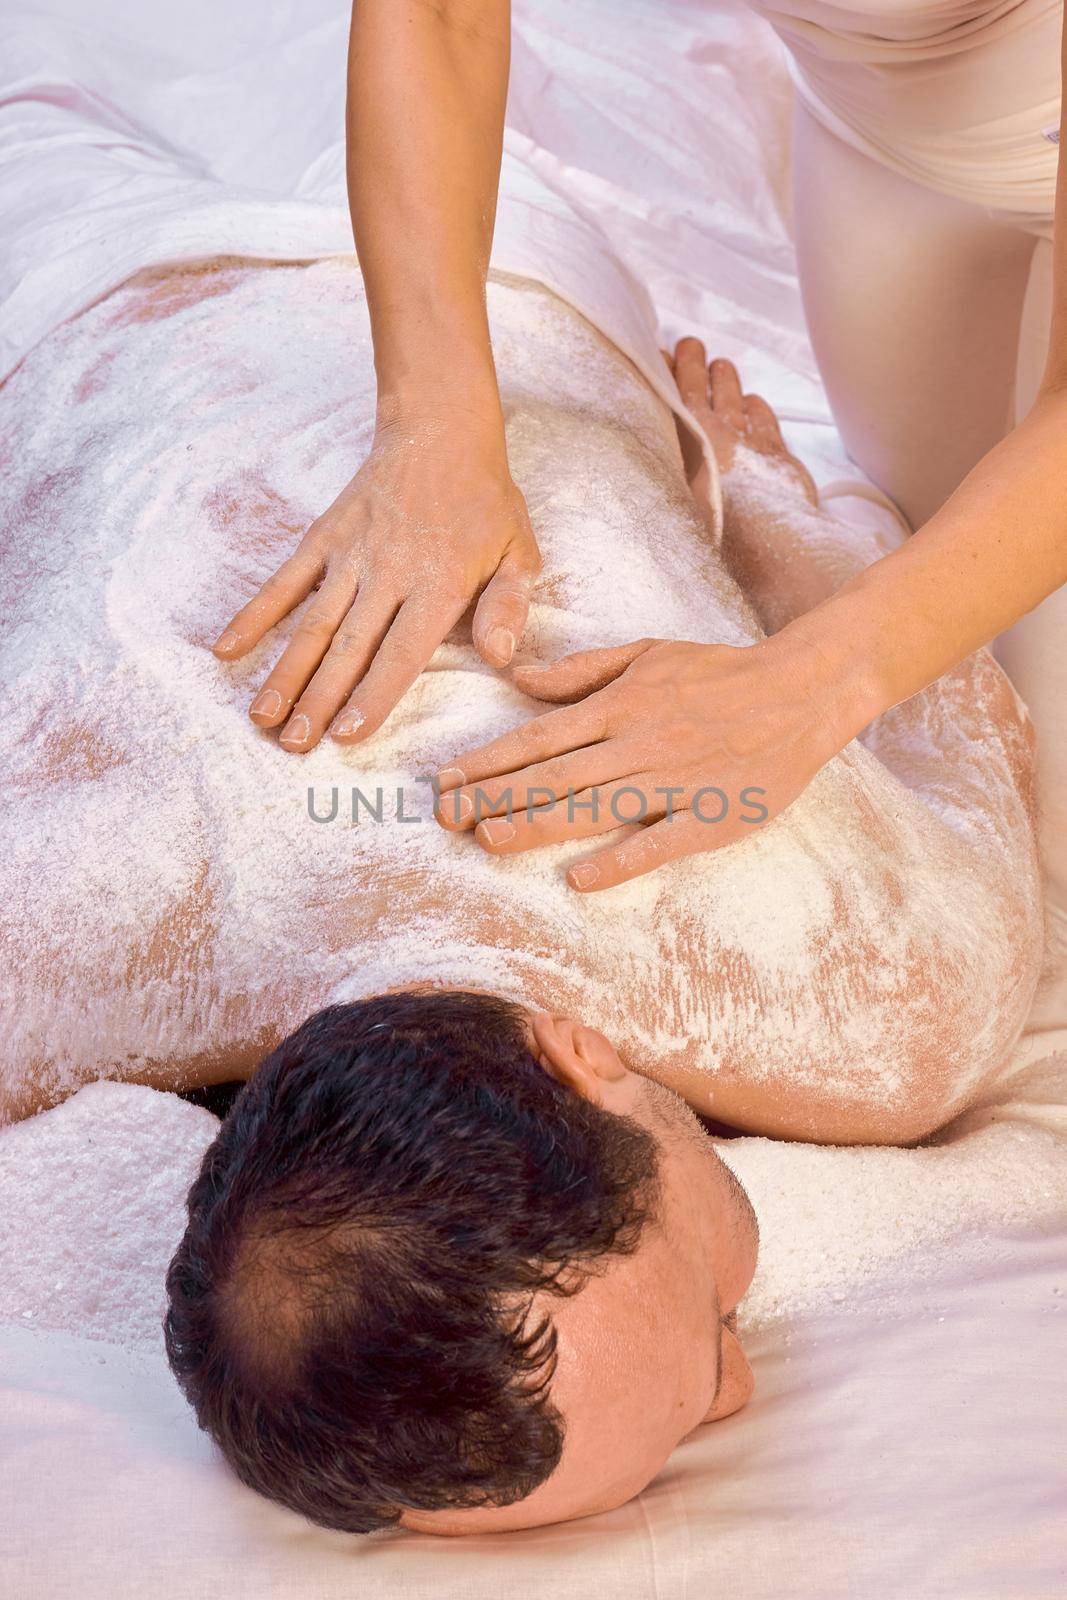 A woman healer performs a ritual with salt, rubs the back of a lying man with salt. Relaxation.